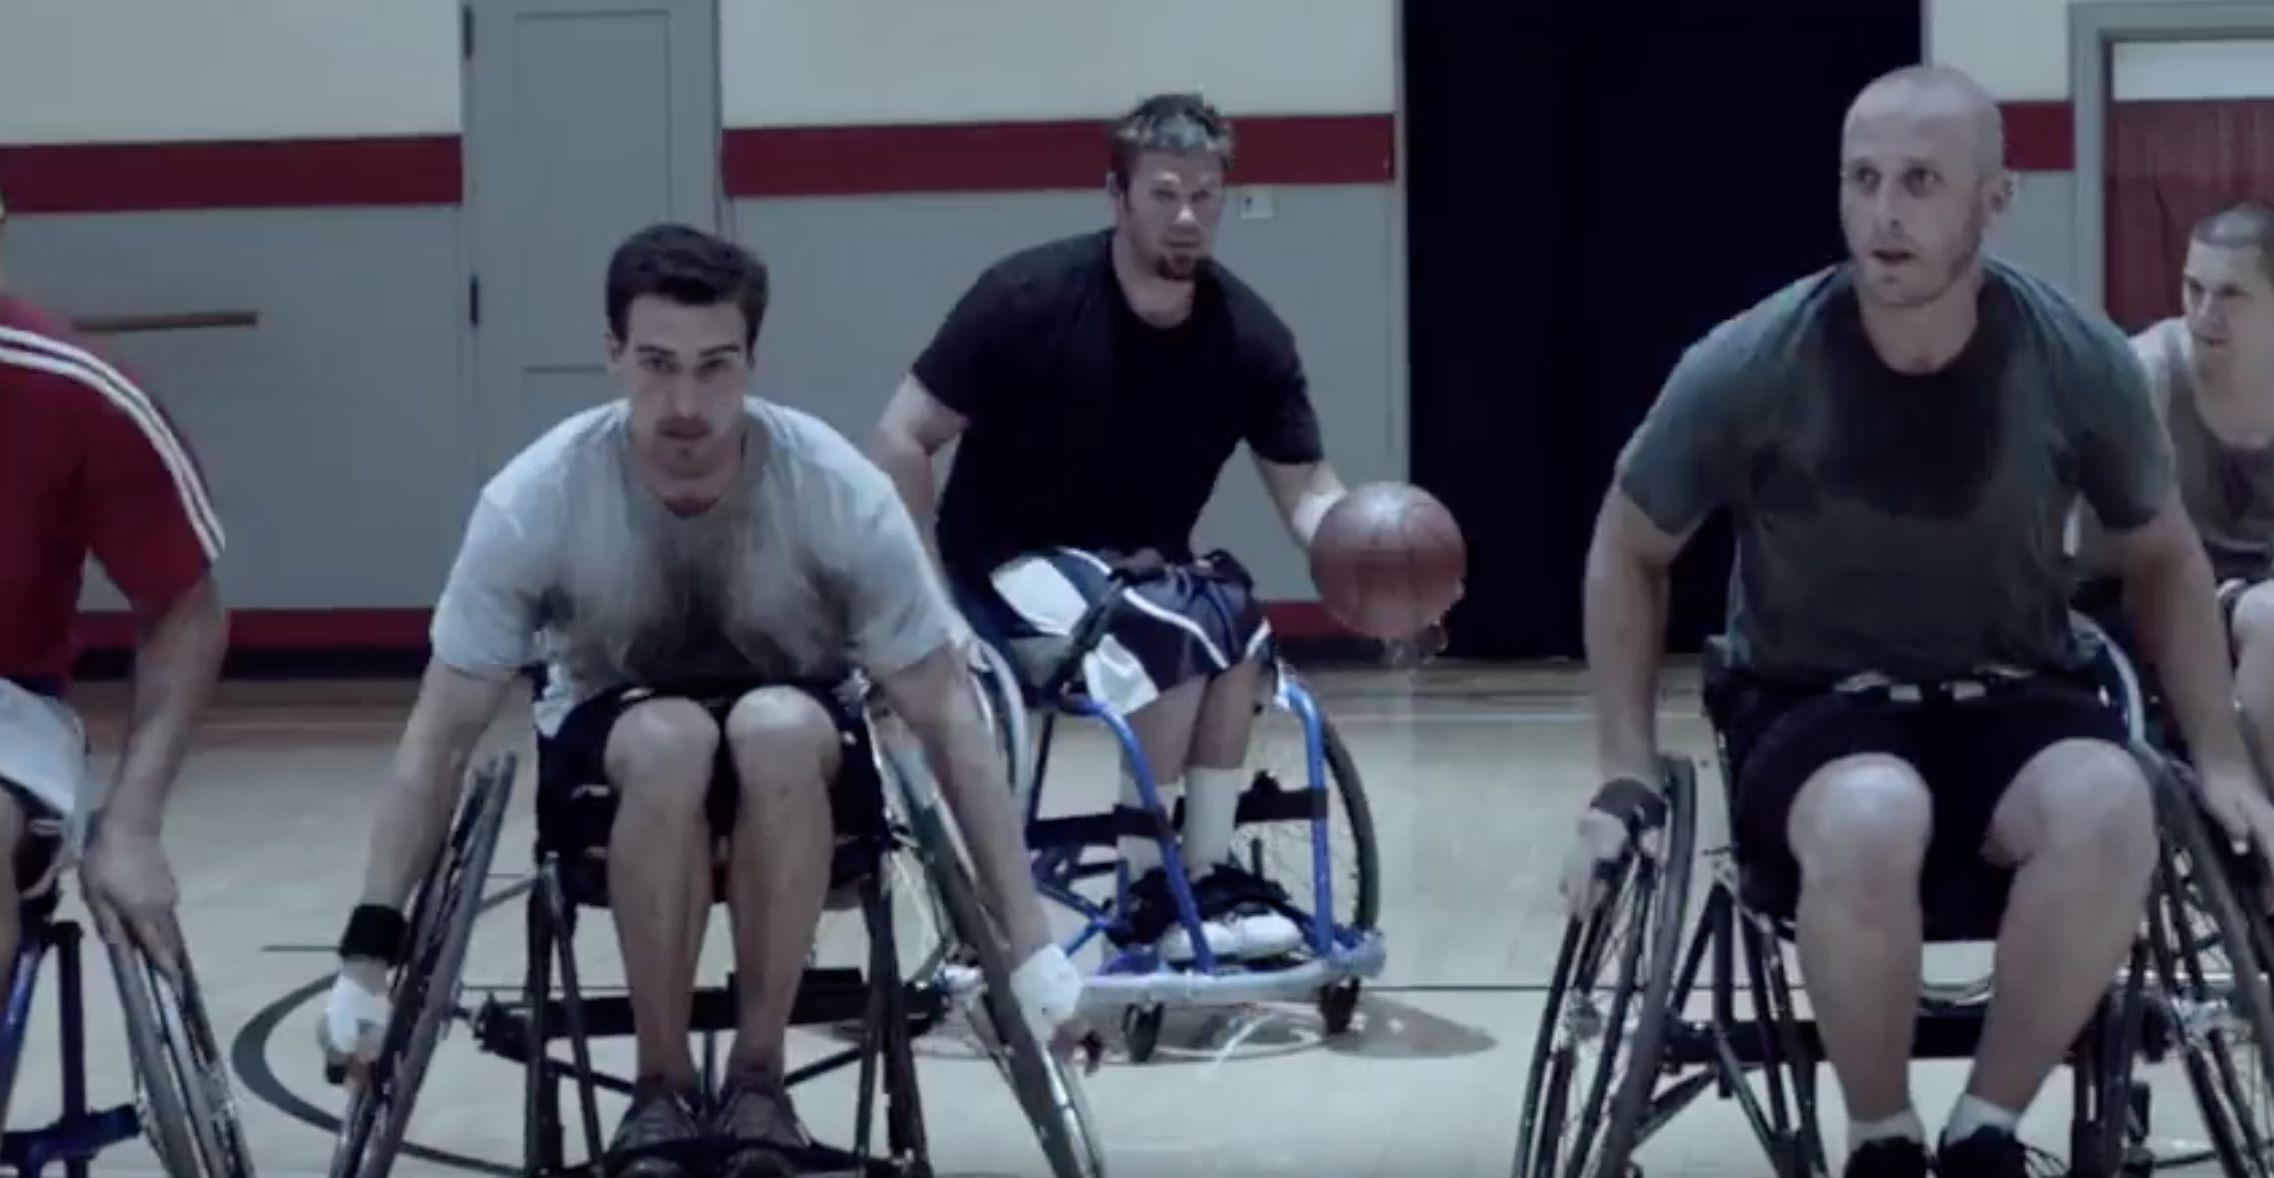 Image of a group of 5 men, all white, all sweaty wheeling to the other end of the court in wheelchair basketball. The man in the middle is dribbling the ball.